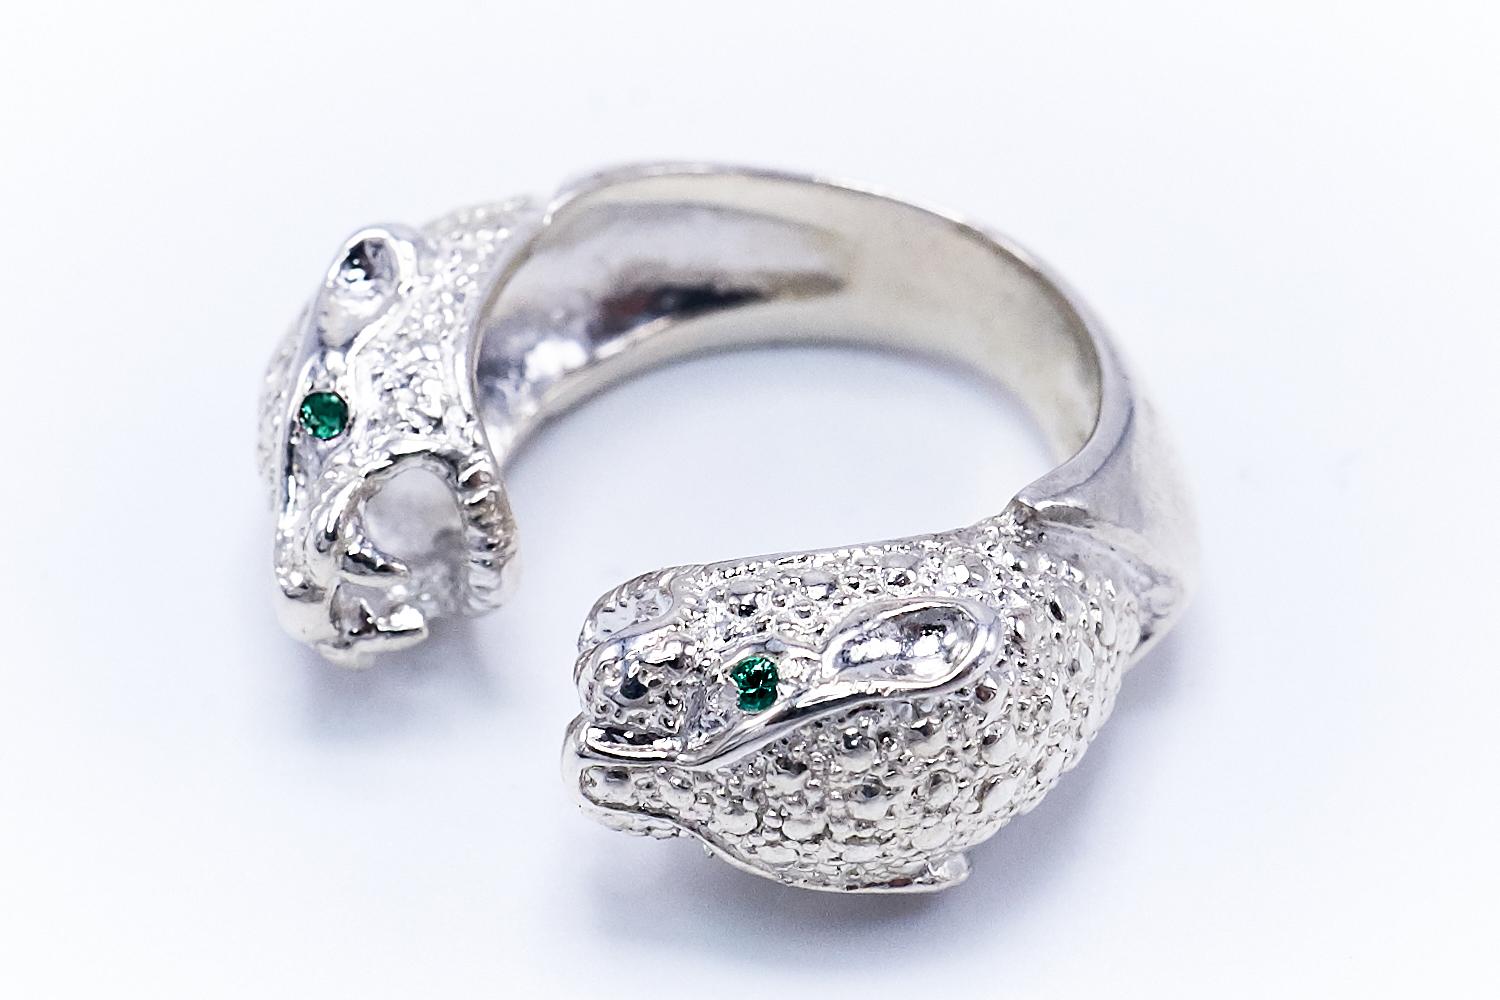 Emerald Double Head Jaguar Ring Sterling Silver Cocktail Statement Piece Animal Ring J Dauphin

J DAUPHIN Ring 